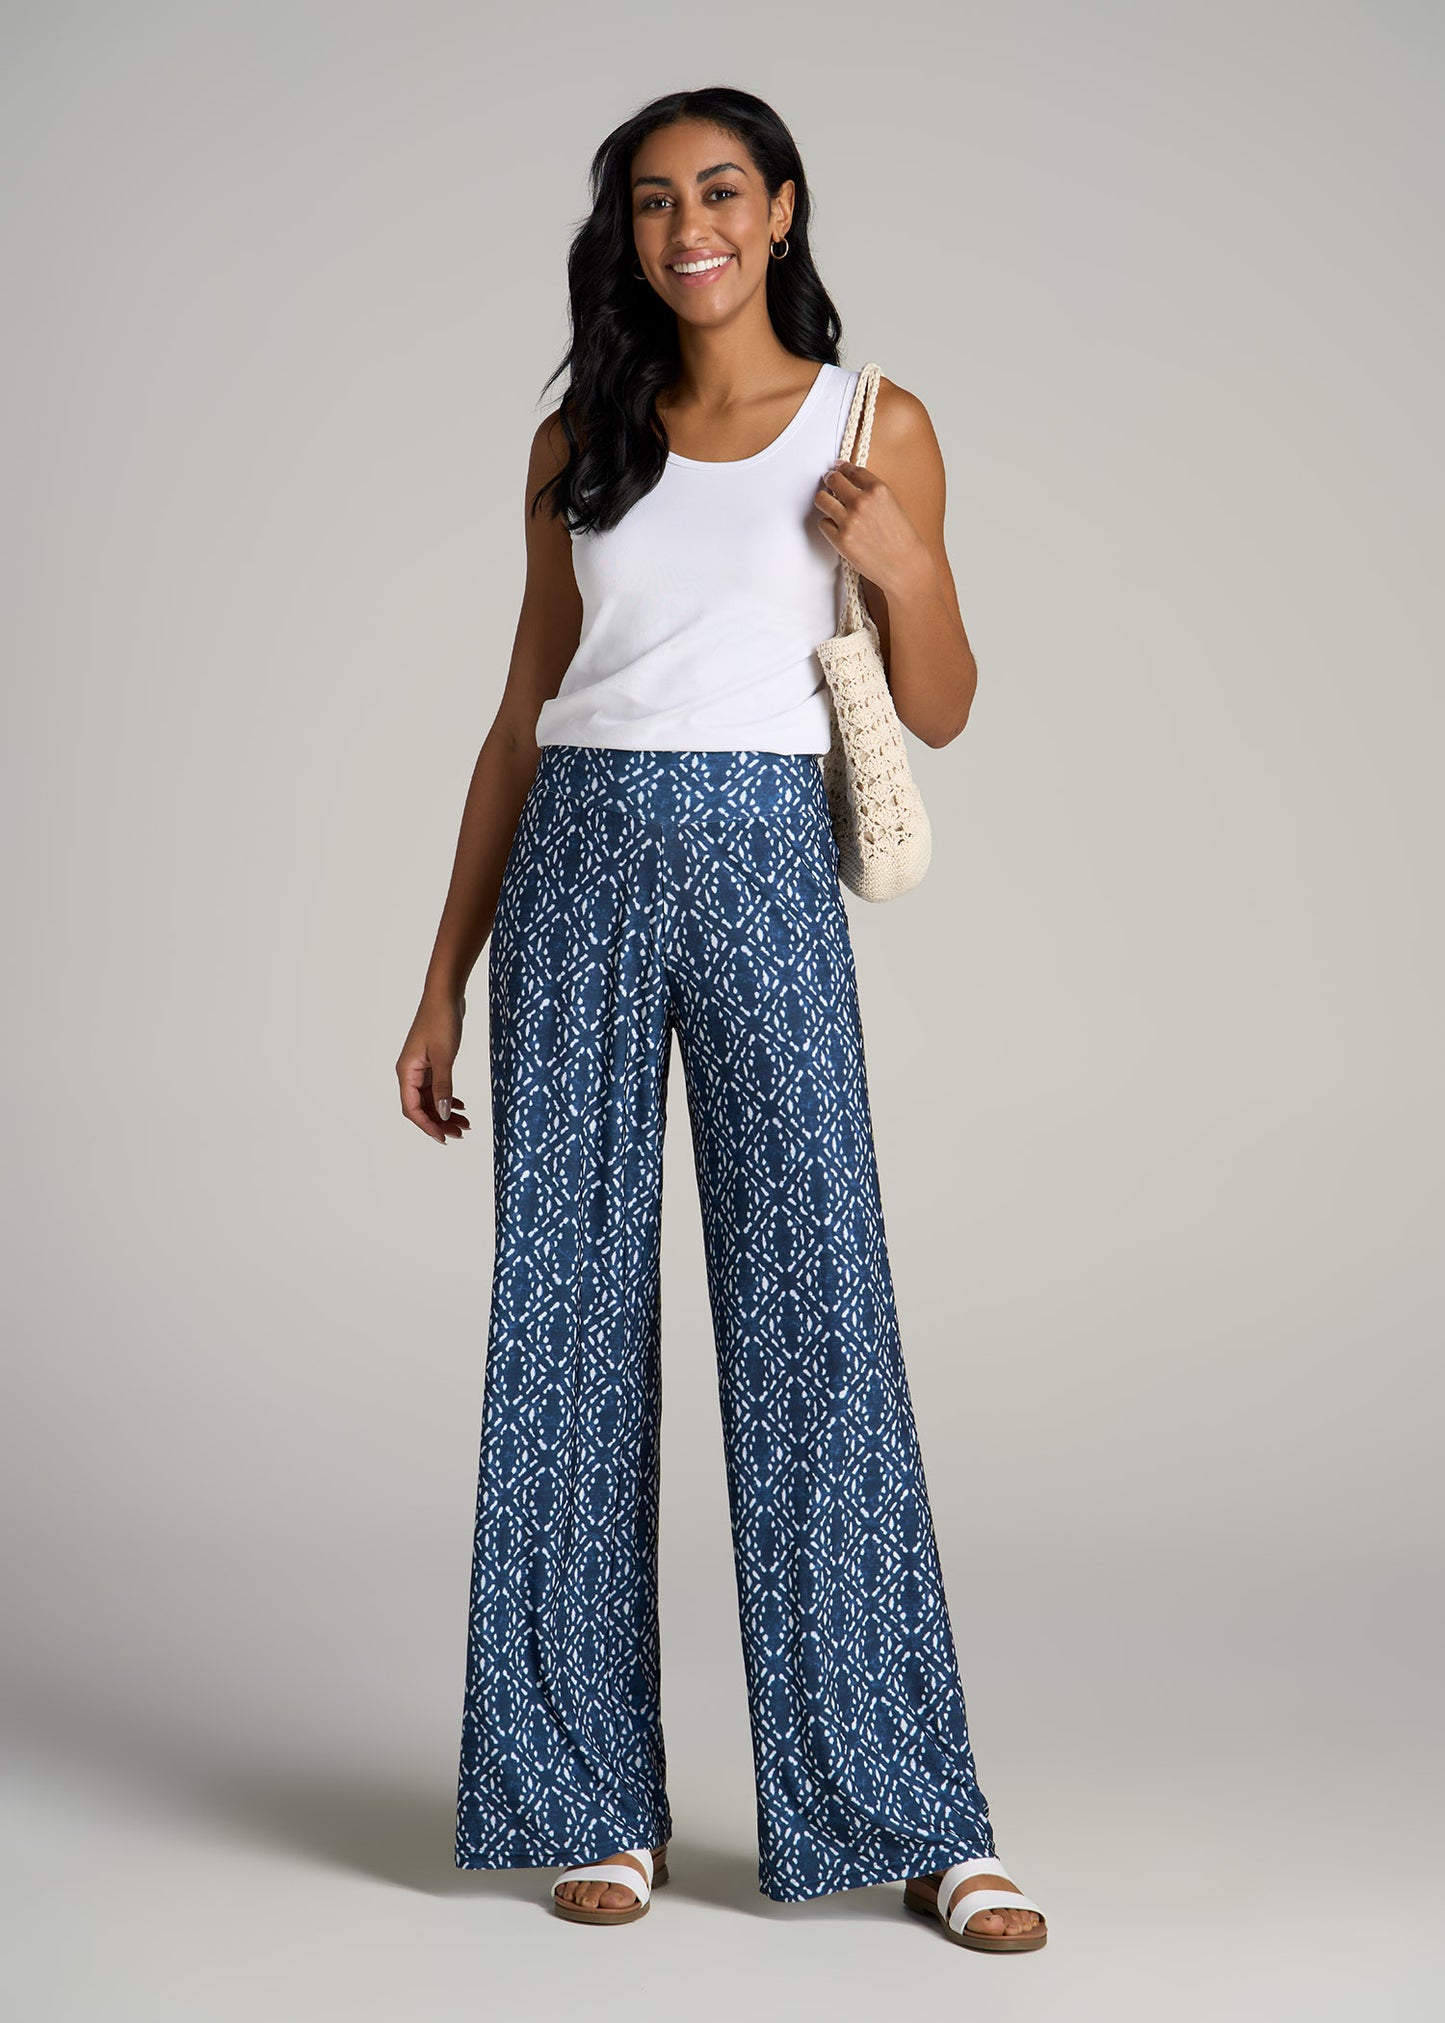 A tall woman wearing Pull On Breezy Wide Leg Pants for Tall Women in Indigo Tribal Print from American Tall